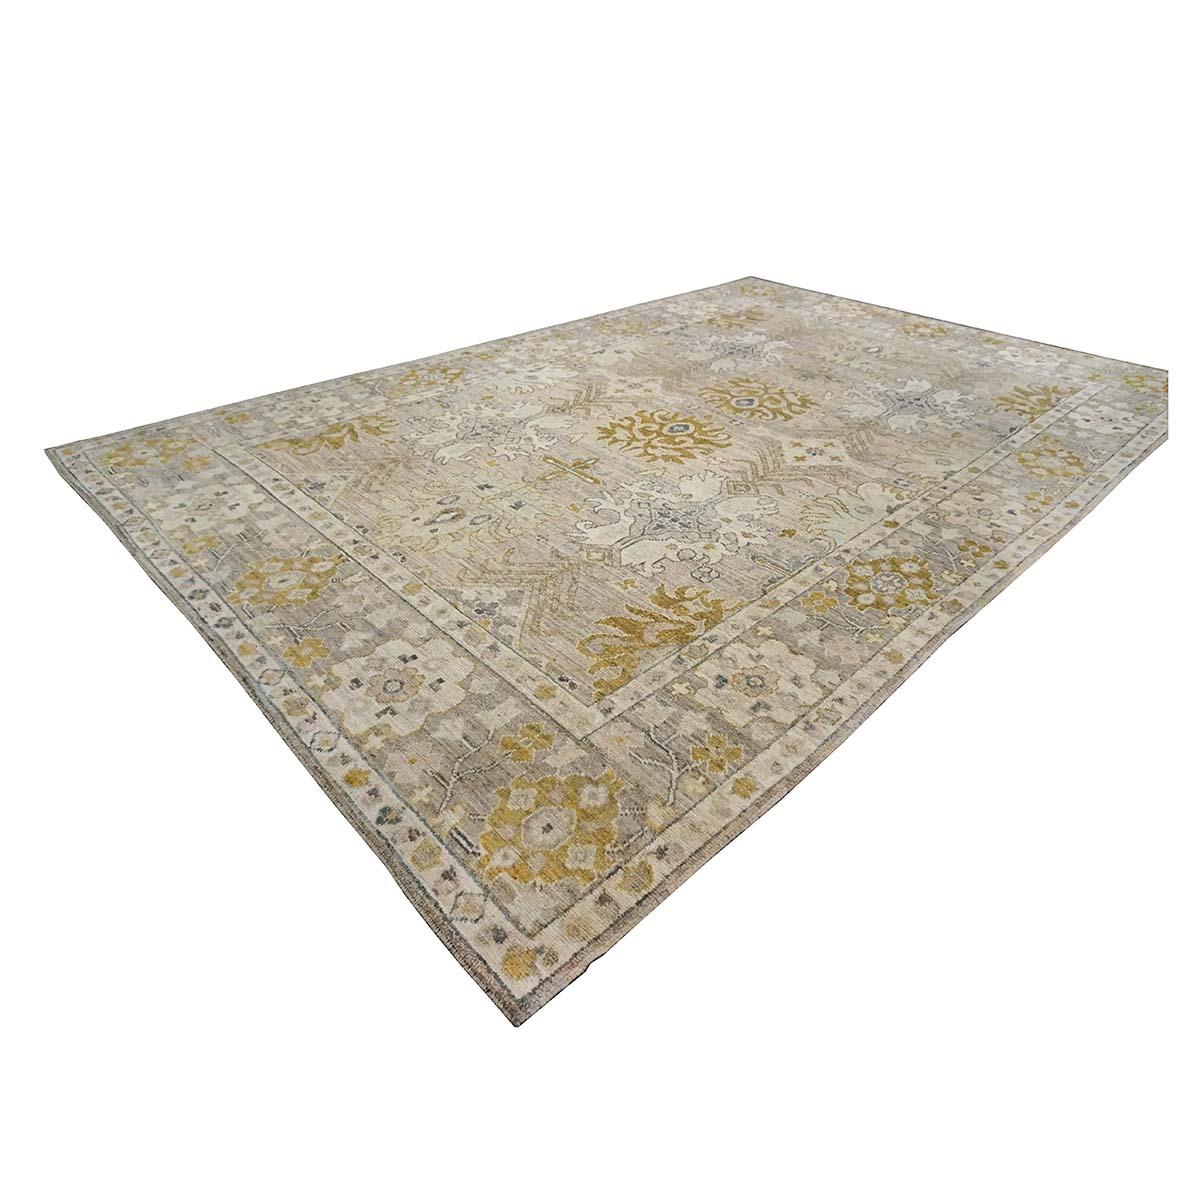 21st Century Turkish Oushak 10x14 Beige, Ivory, & Gold Handmade Area Rug In Excellent Condition For Sale In Houston, TX